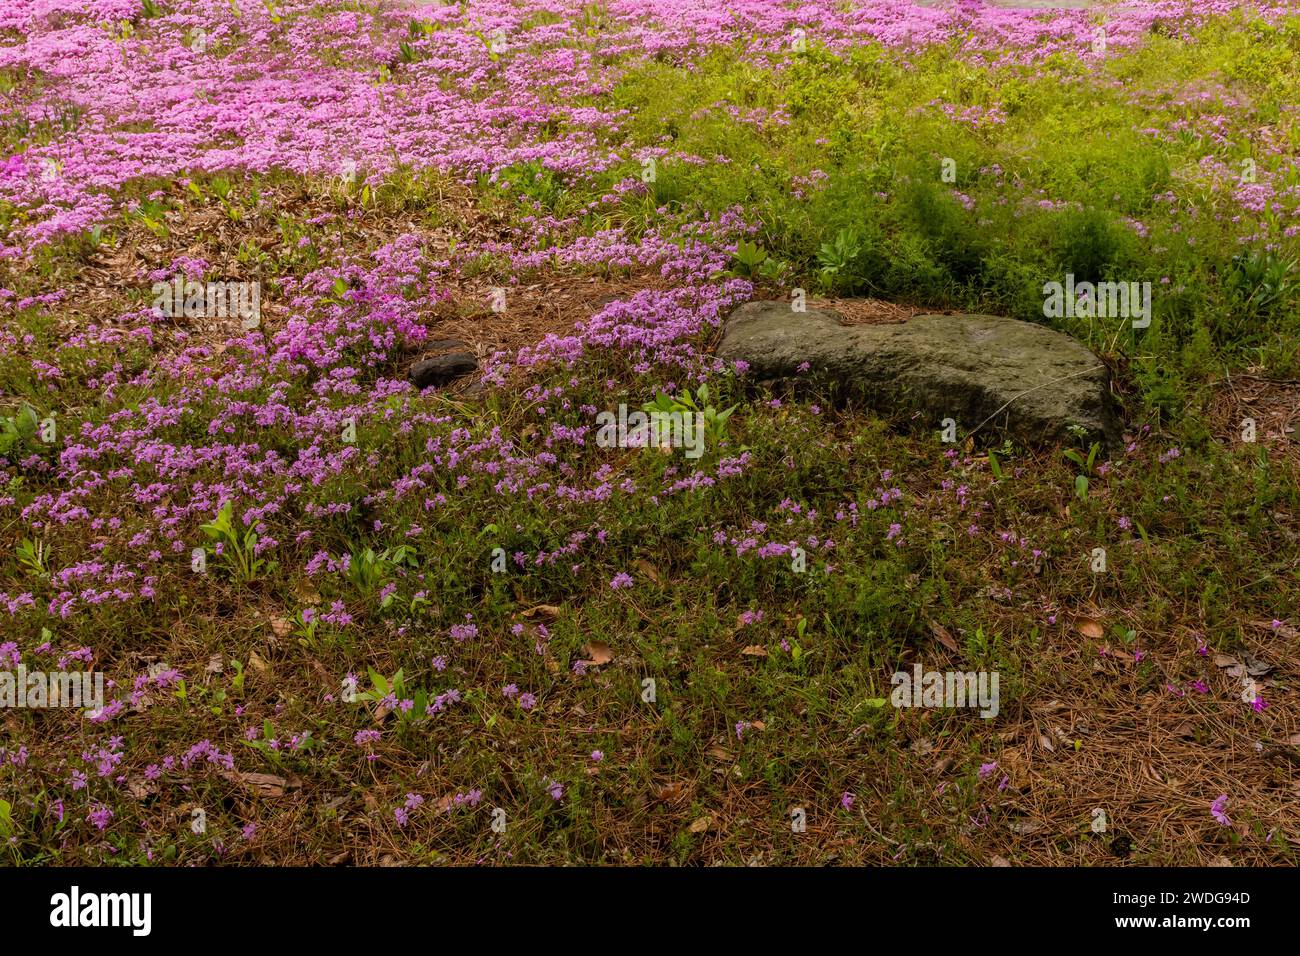 Large flat boulder in field of grass and lilac colored flowers, South Korea, South Korea Stock Photo